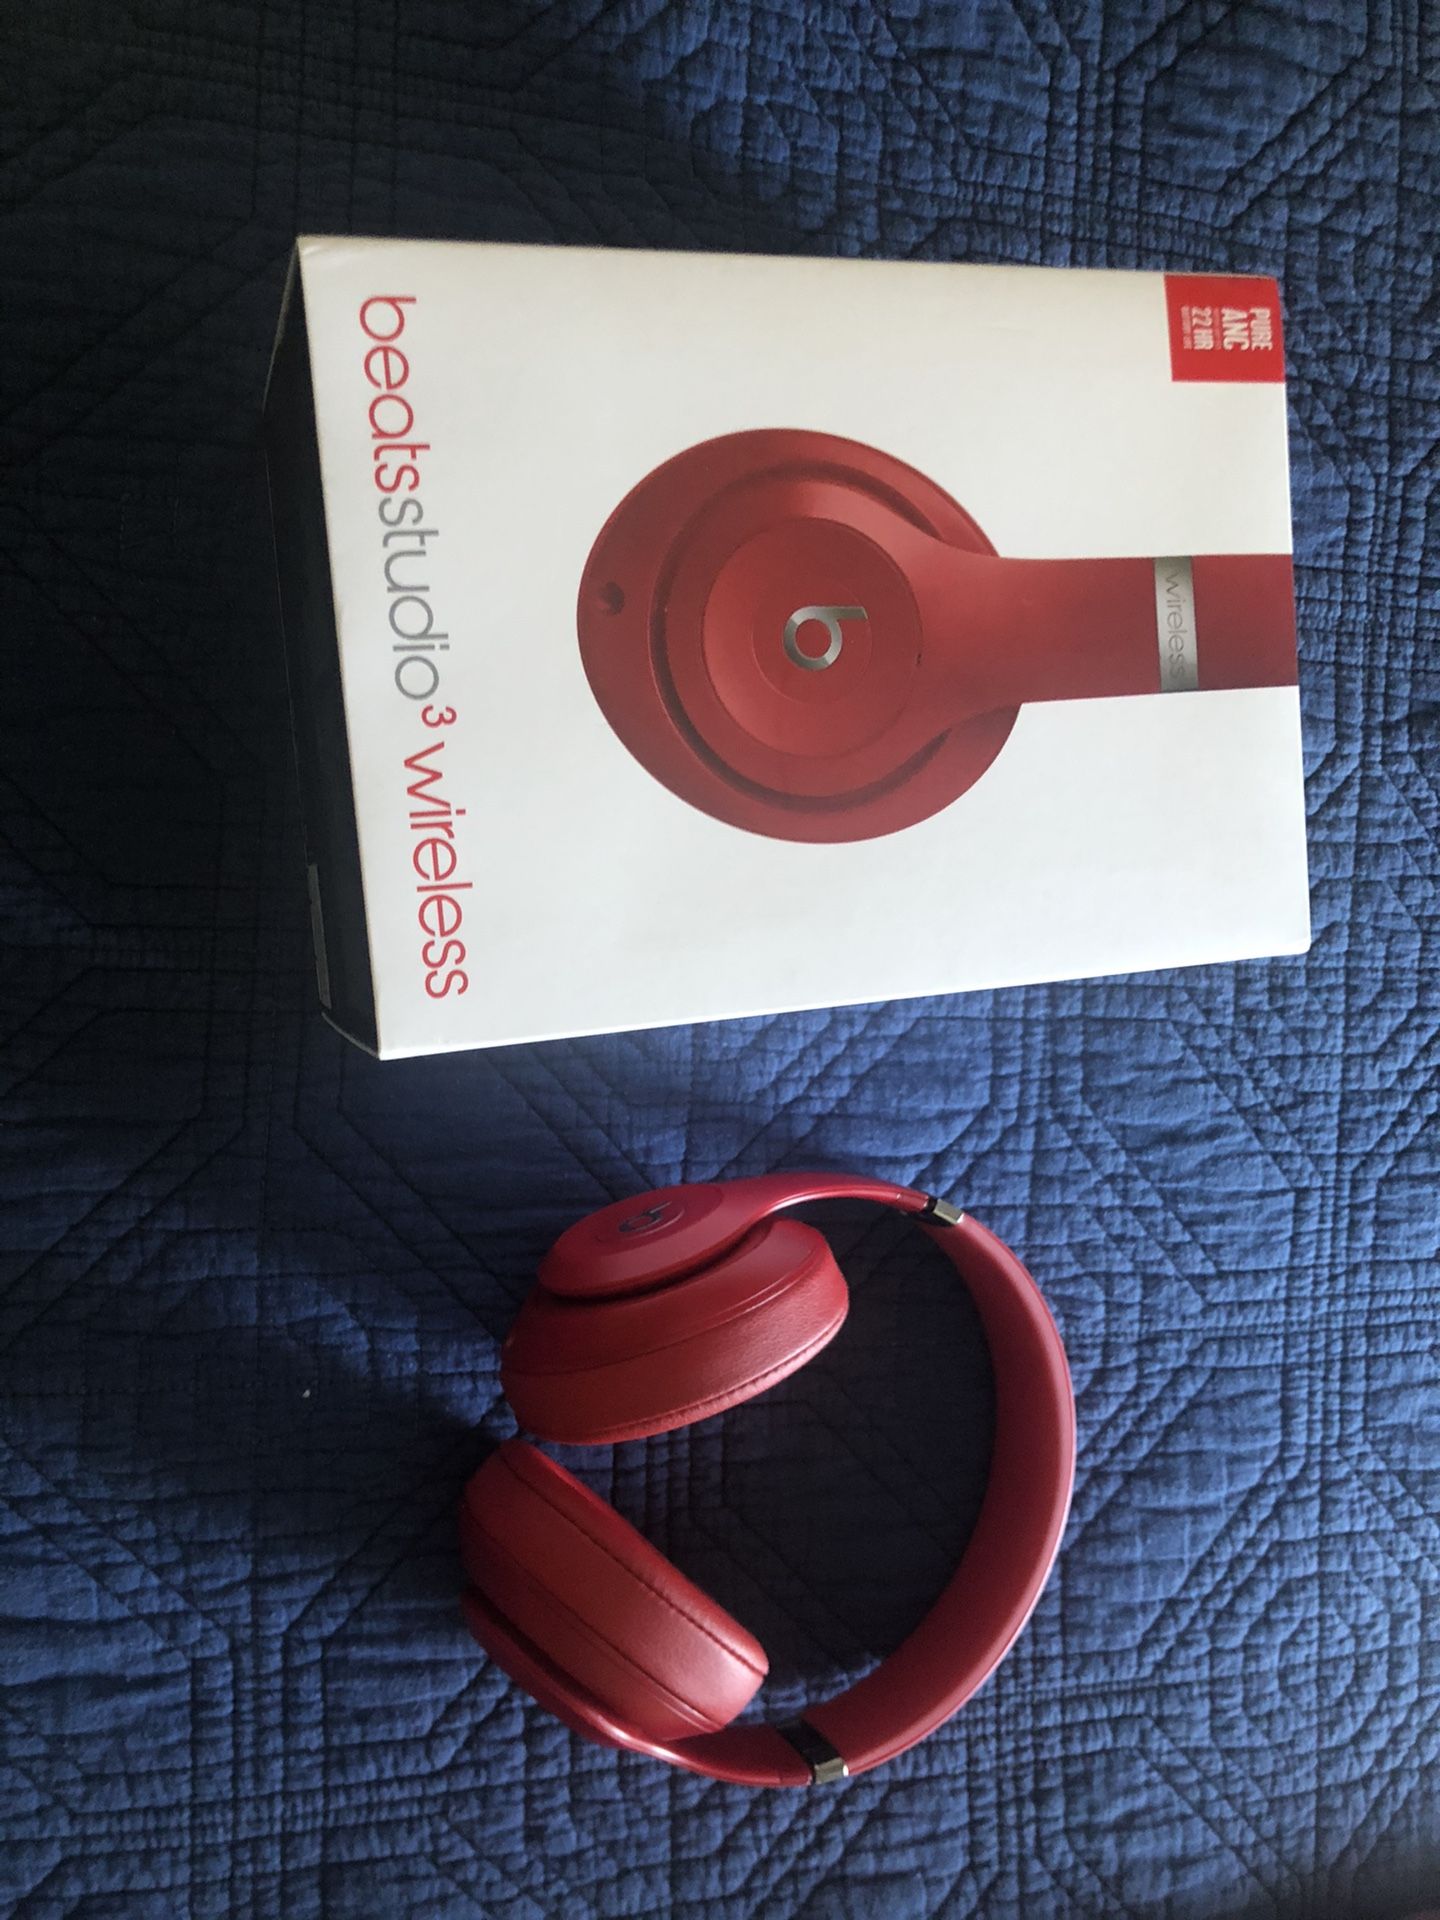 Beats studio 3 box and case included